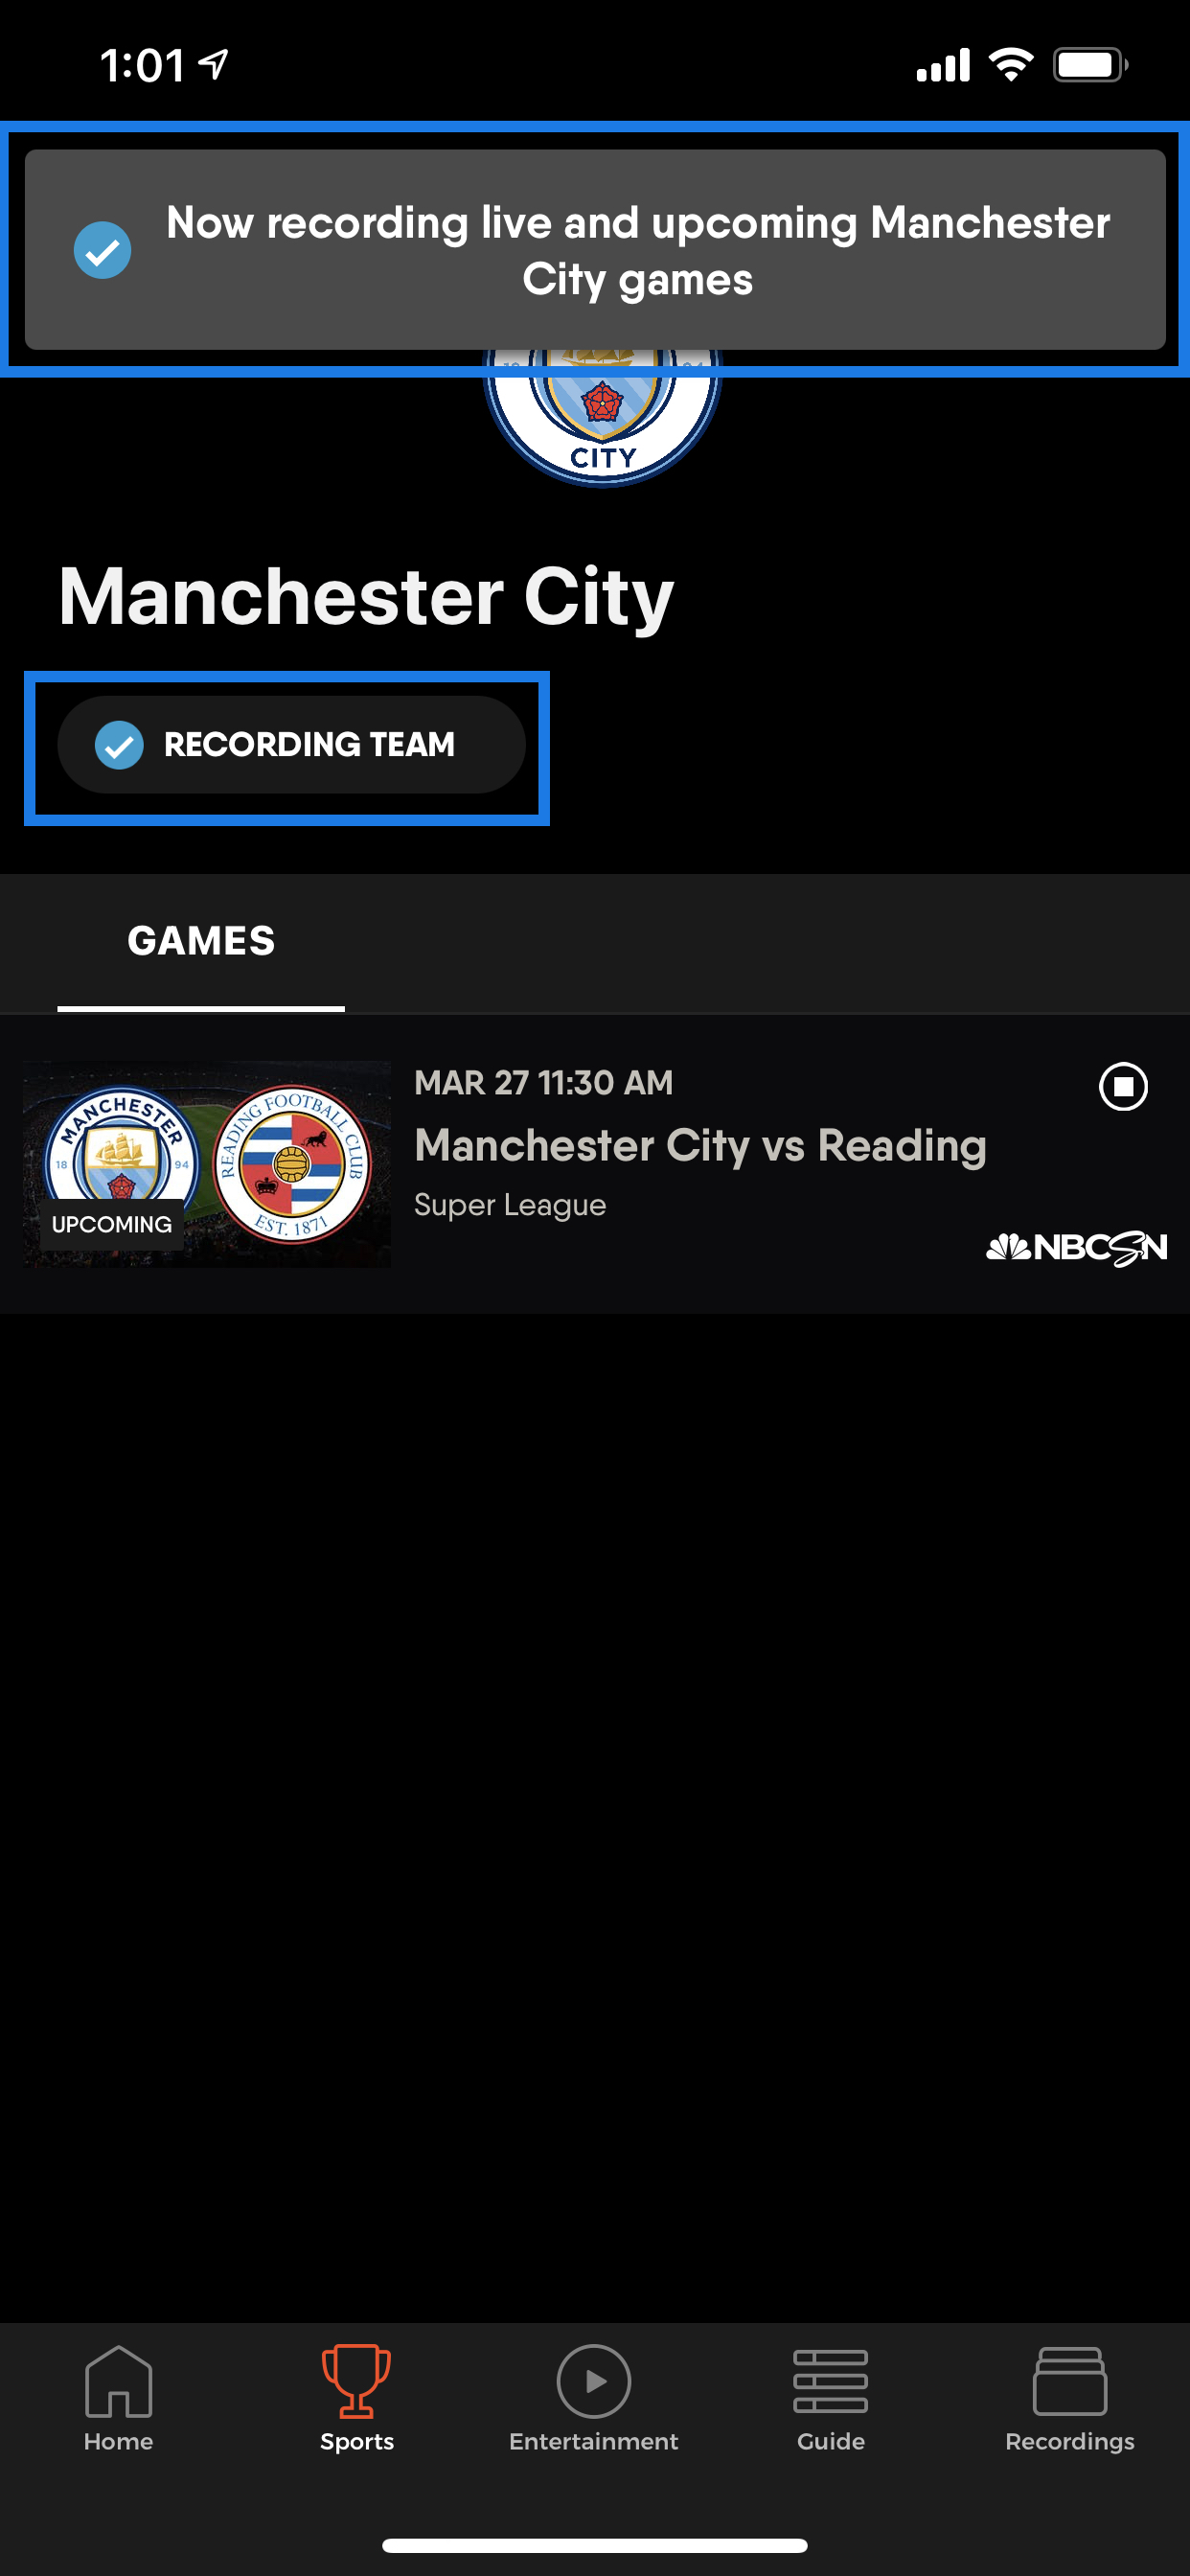 TEAM INFO screen for Manchester City on the FuboTV app for iOS with a confirmation message that all team matches will be recorded